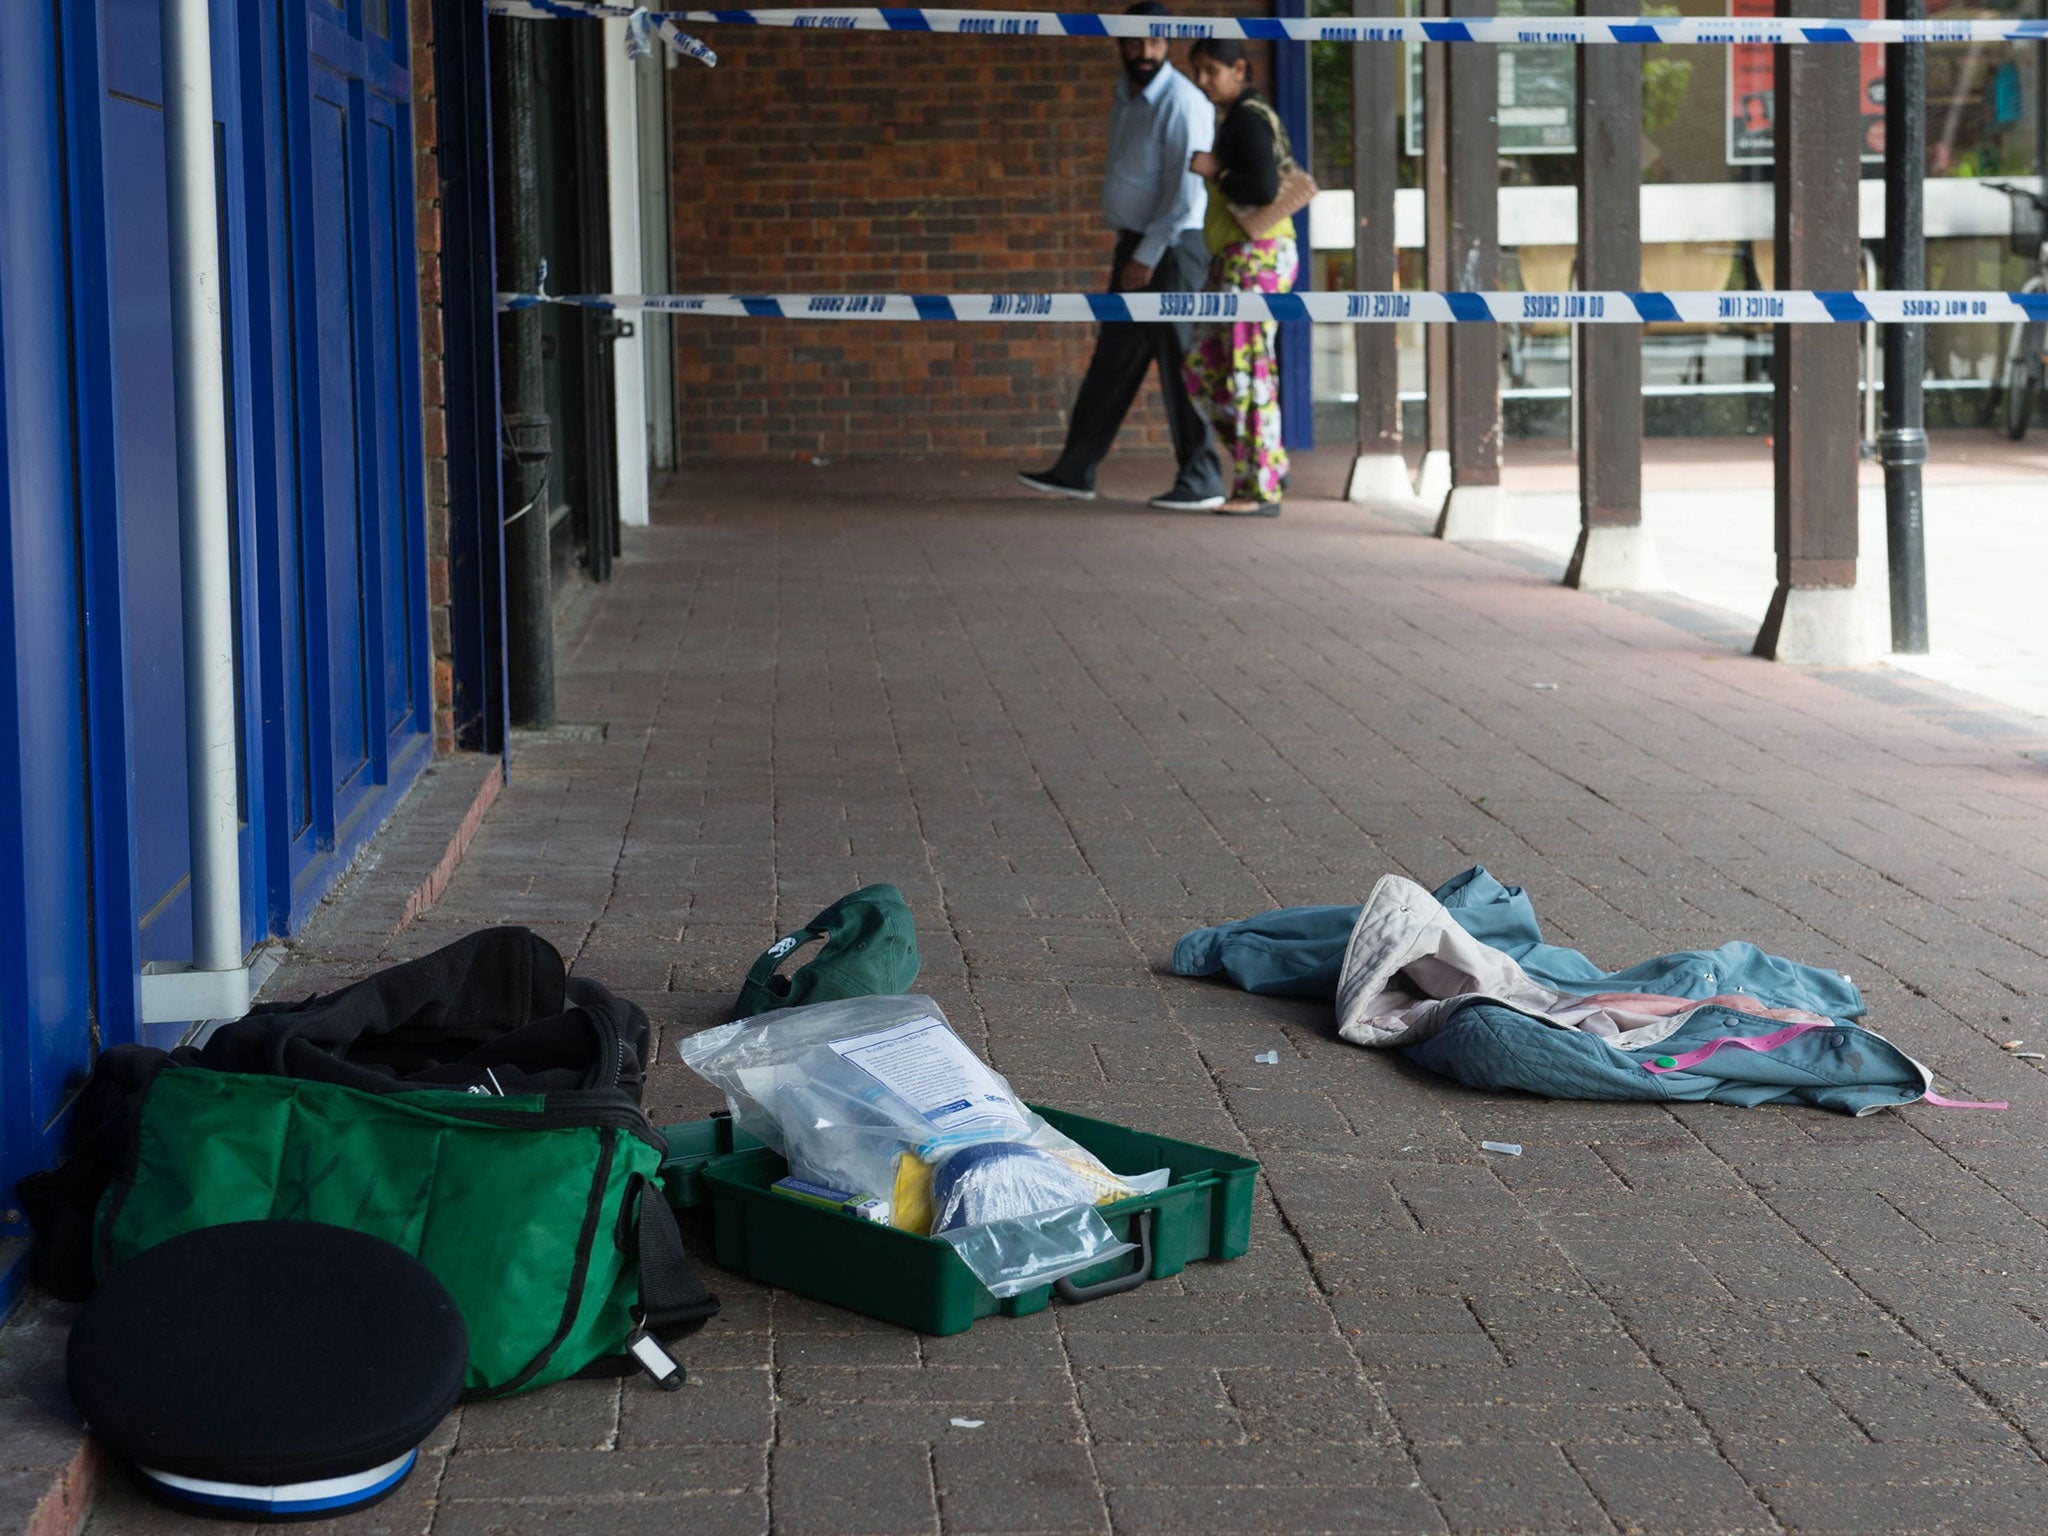 Bloodstained clothing at the scene of a stabbing incident in Hampton, London, on 20 May 2016